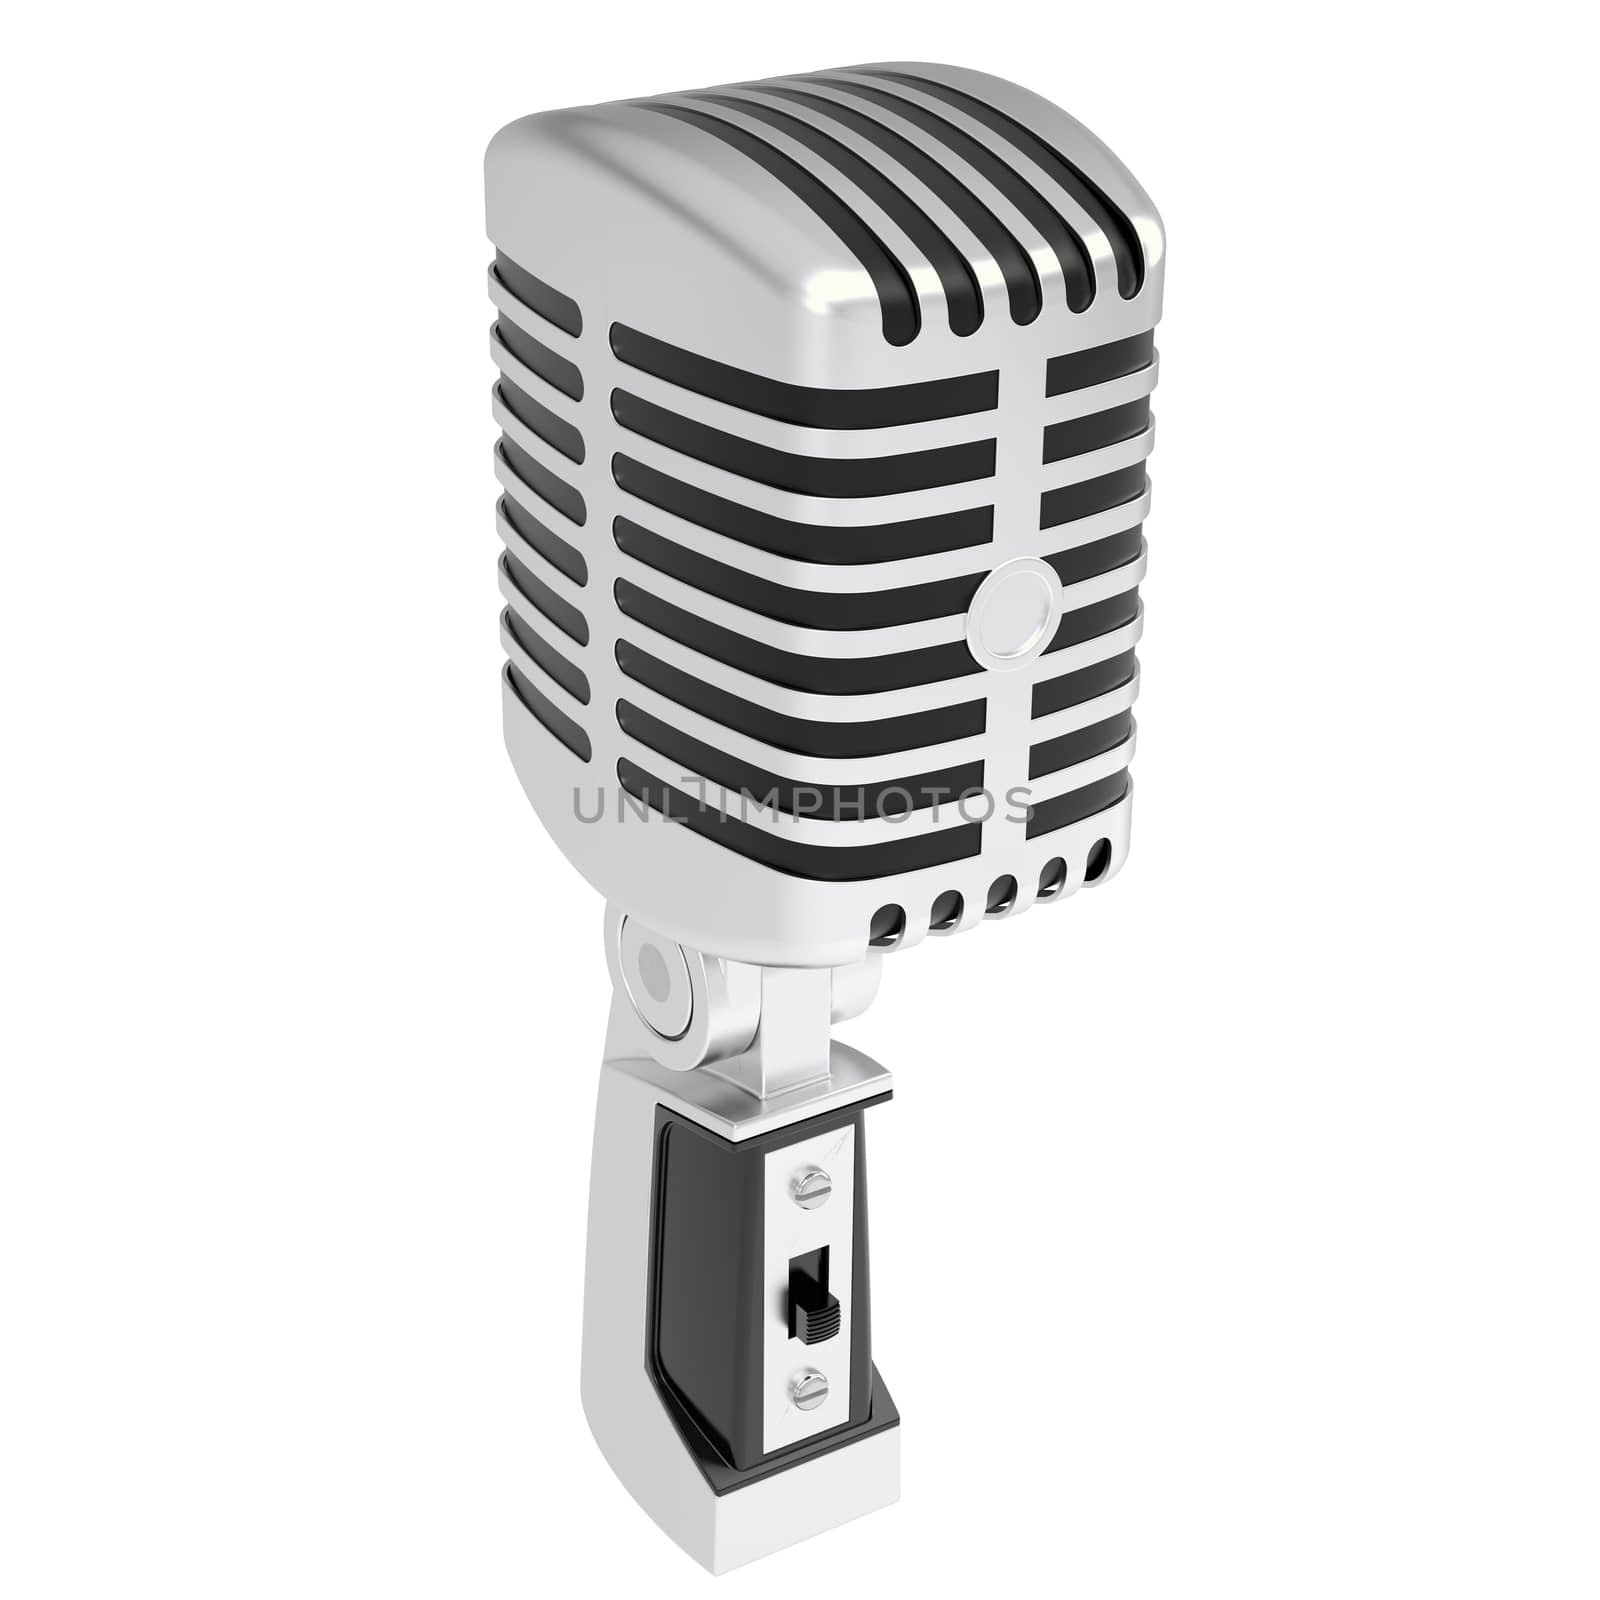 Vintage microphone. Isolated render on a white background